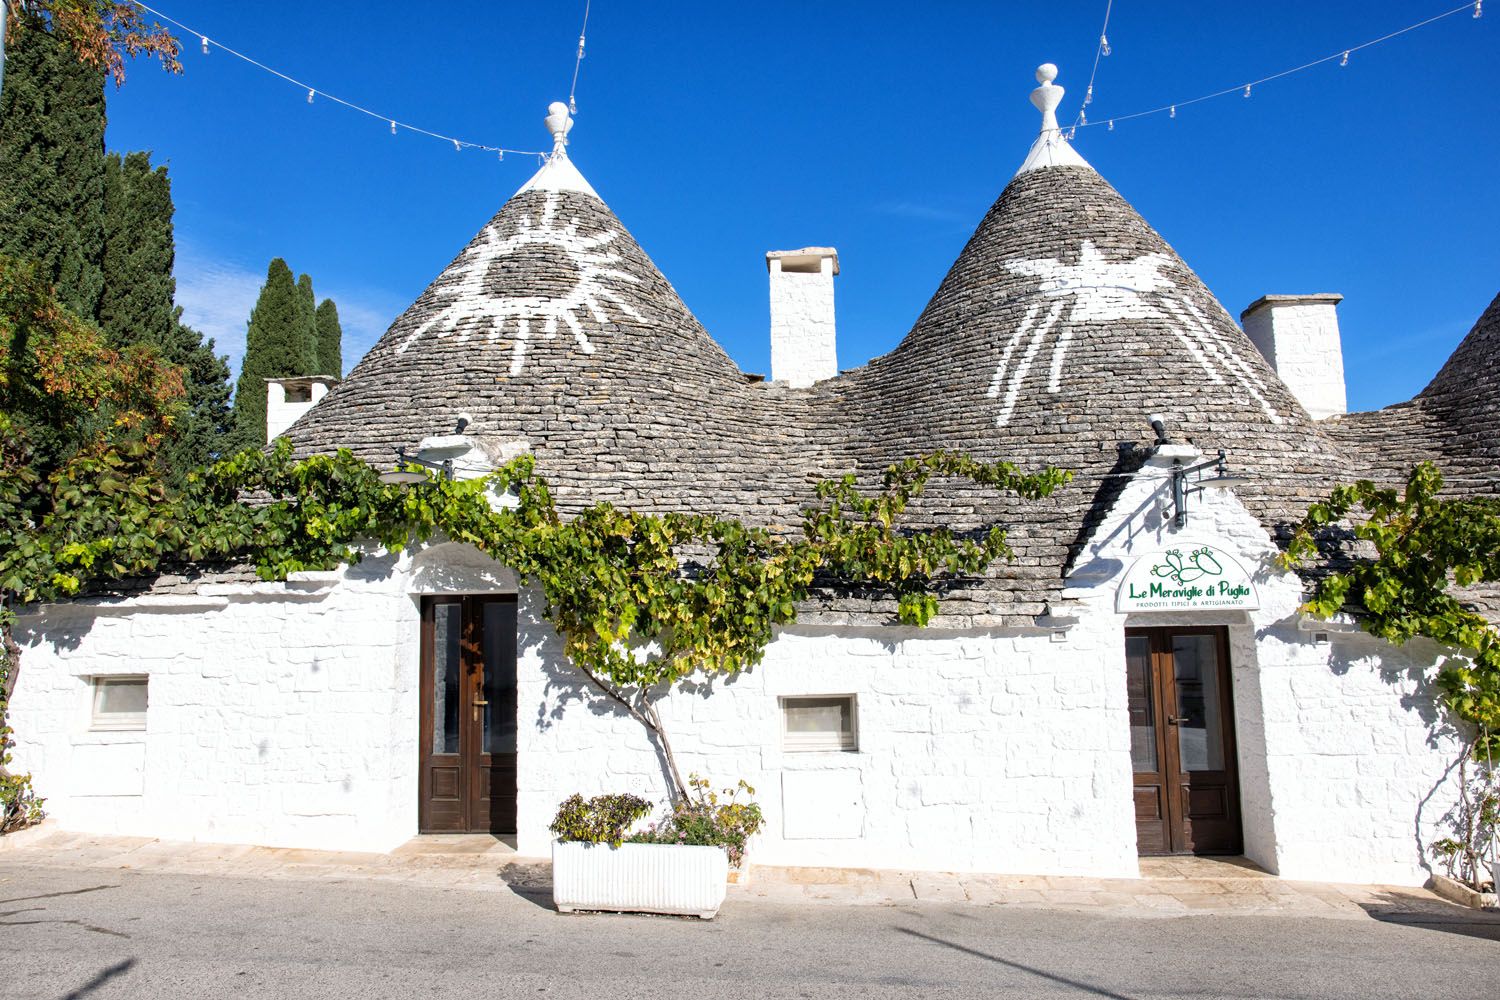 15 Amazing Things to Do in Alberobello (With Photos & Helpful Tips